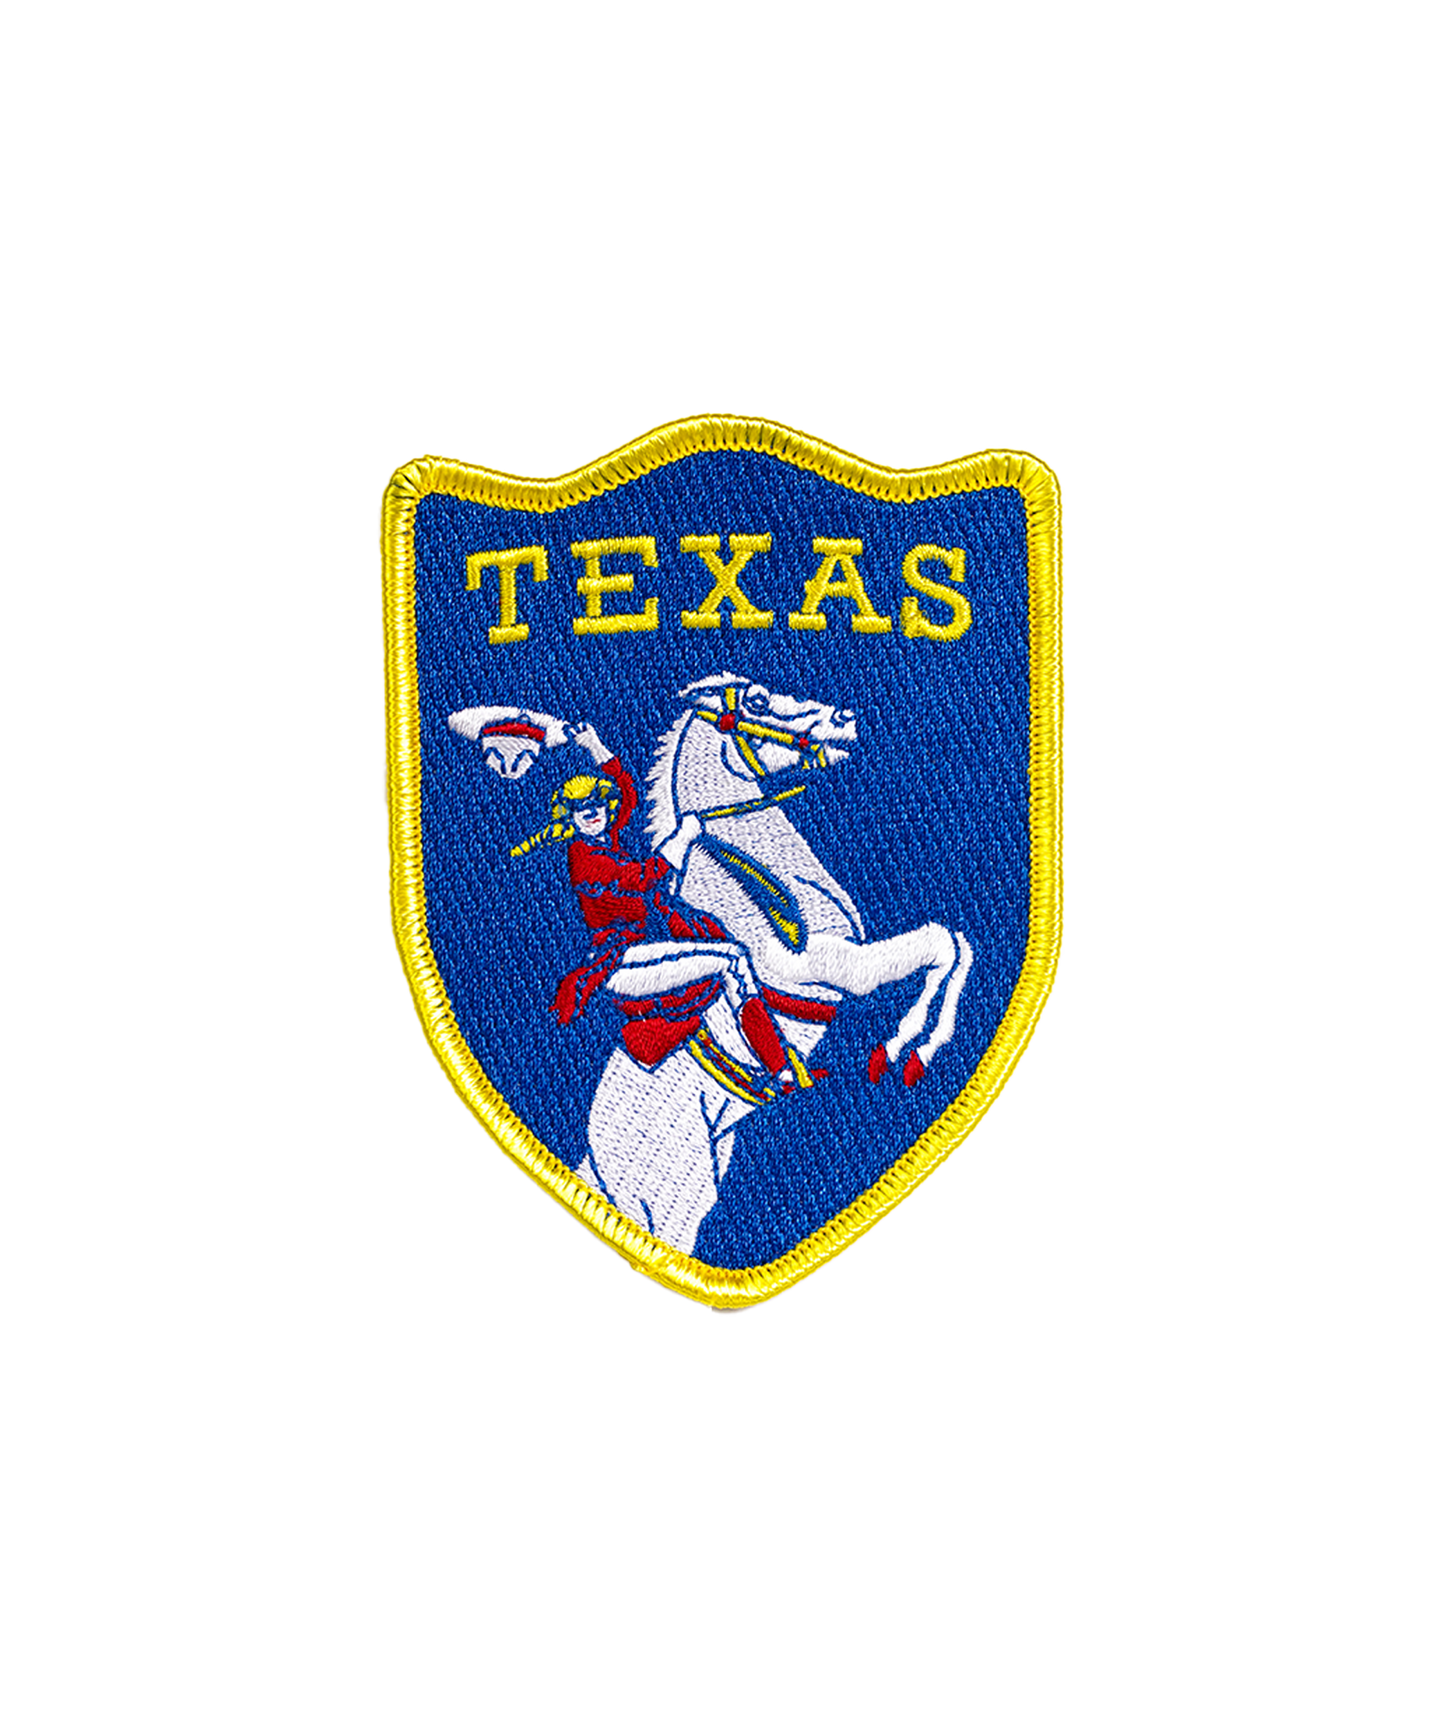 Texas Embroidered Patch